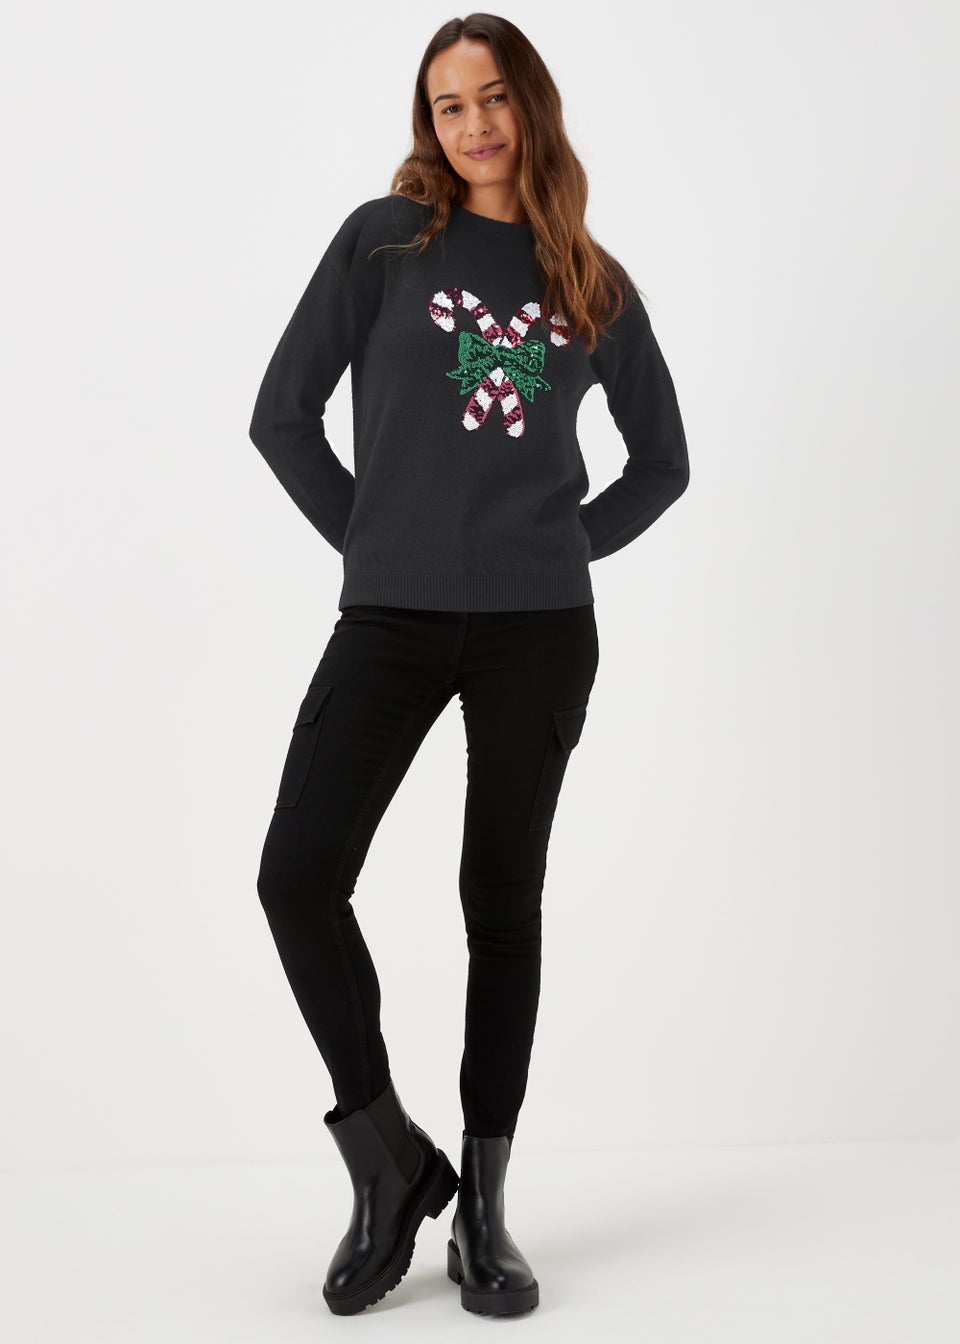 Black Sequin Christmas Candy Cane Jumper